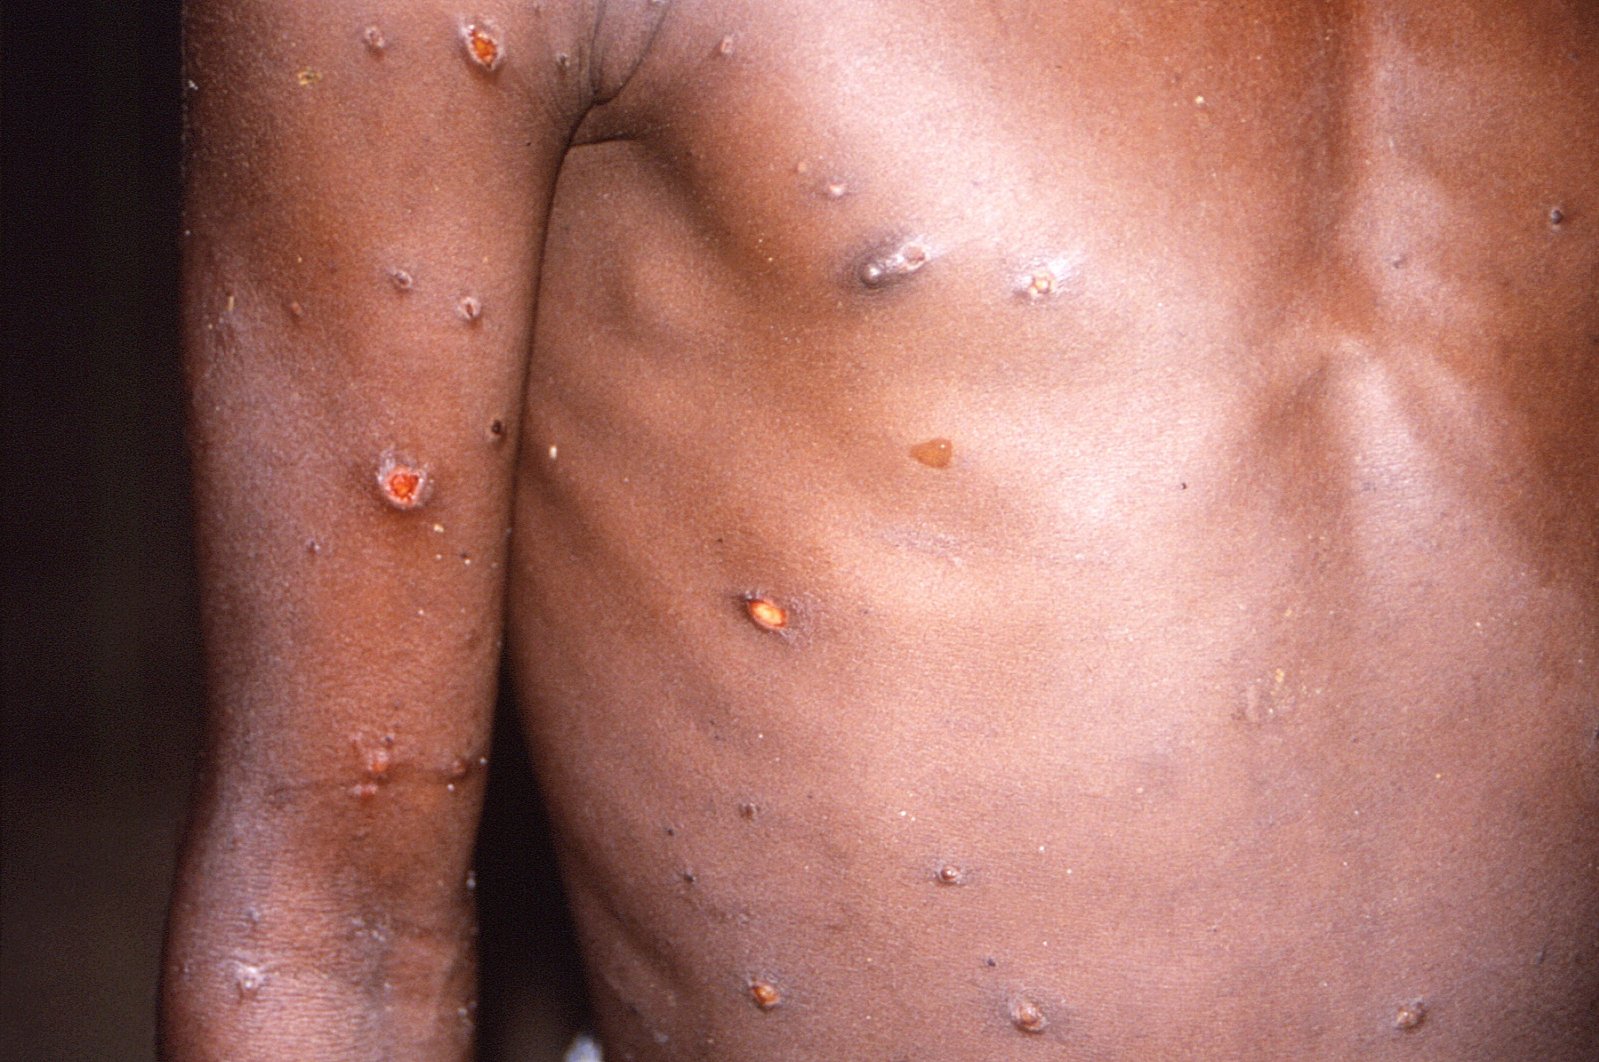 An image created during an investigation into an outbreak of monkeypox, which took place in the Democratic Republic of the Congo, 1996 to 1997, shows the arms and torso of a patient with skin lesions due to monkeypox, in this undated image obtained by Reuters, May 18, 2022. (CDC via Ruters)